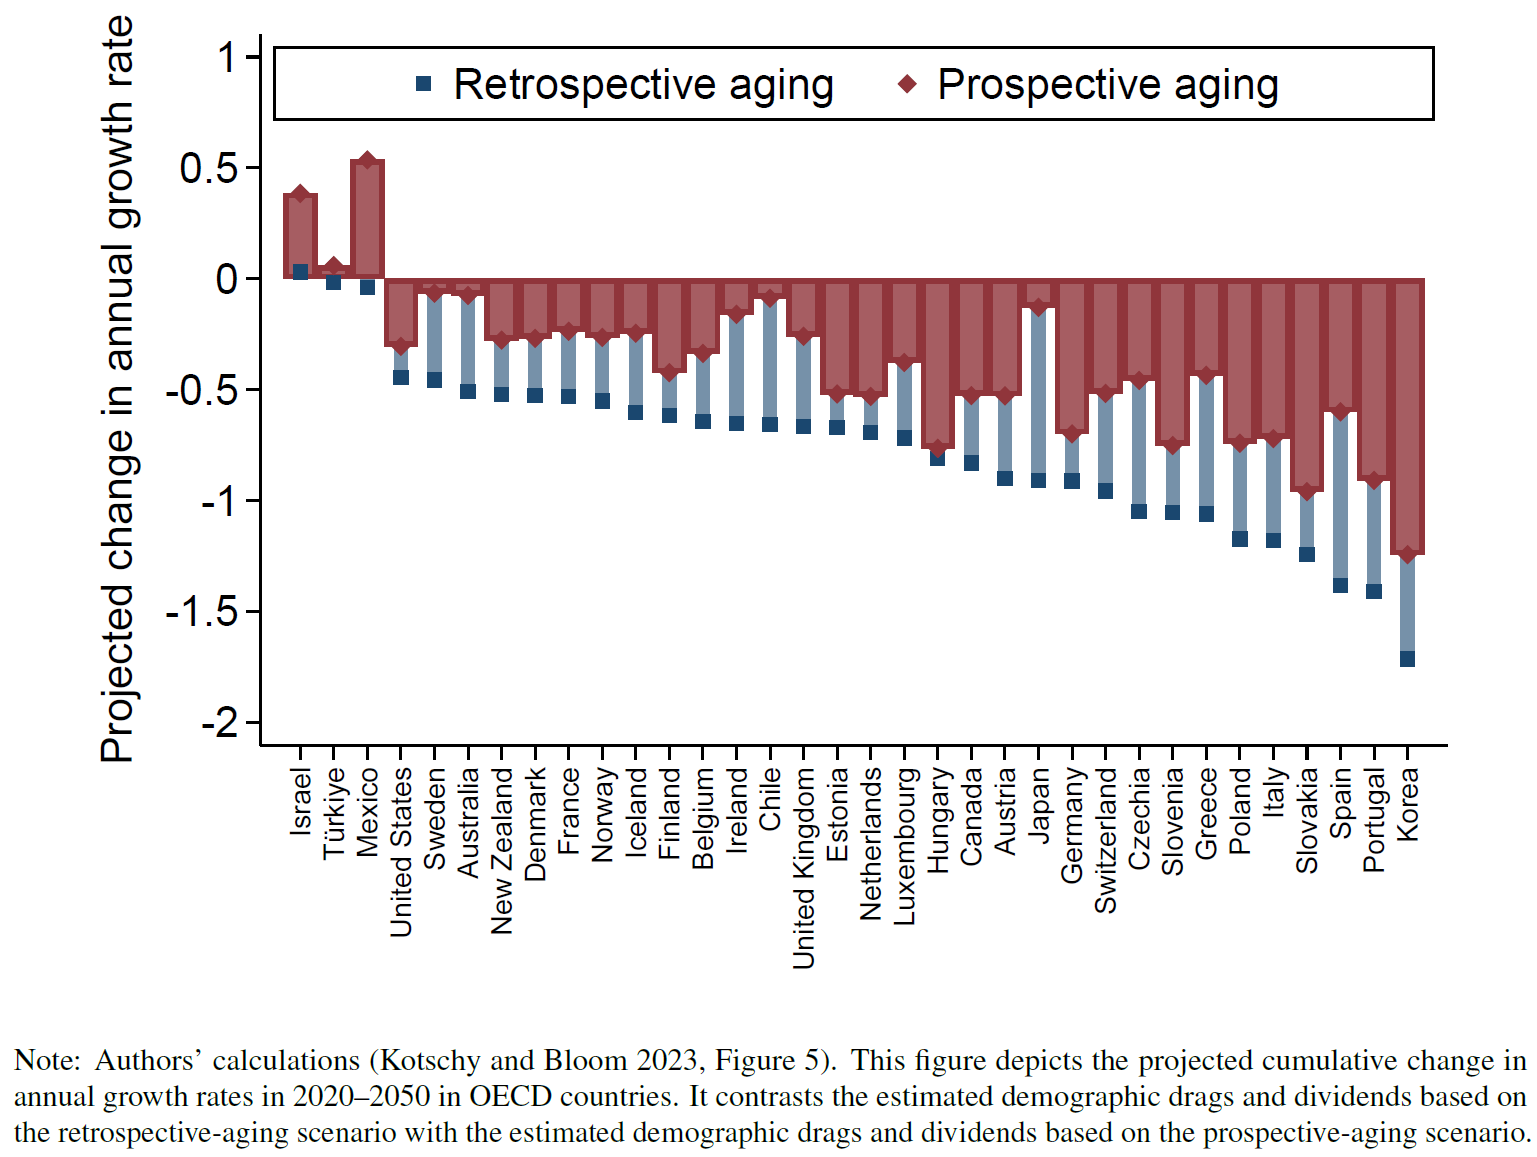 Figure 2 Projected cumulative change in annual growth rates in 2020–2050 in OECD countries under retrospective and prospective ageing